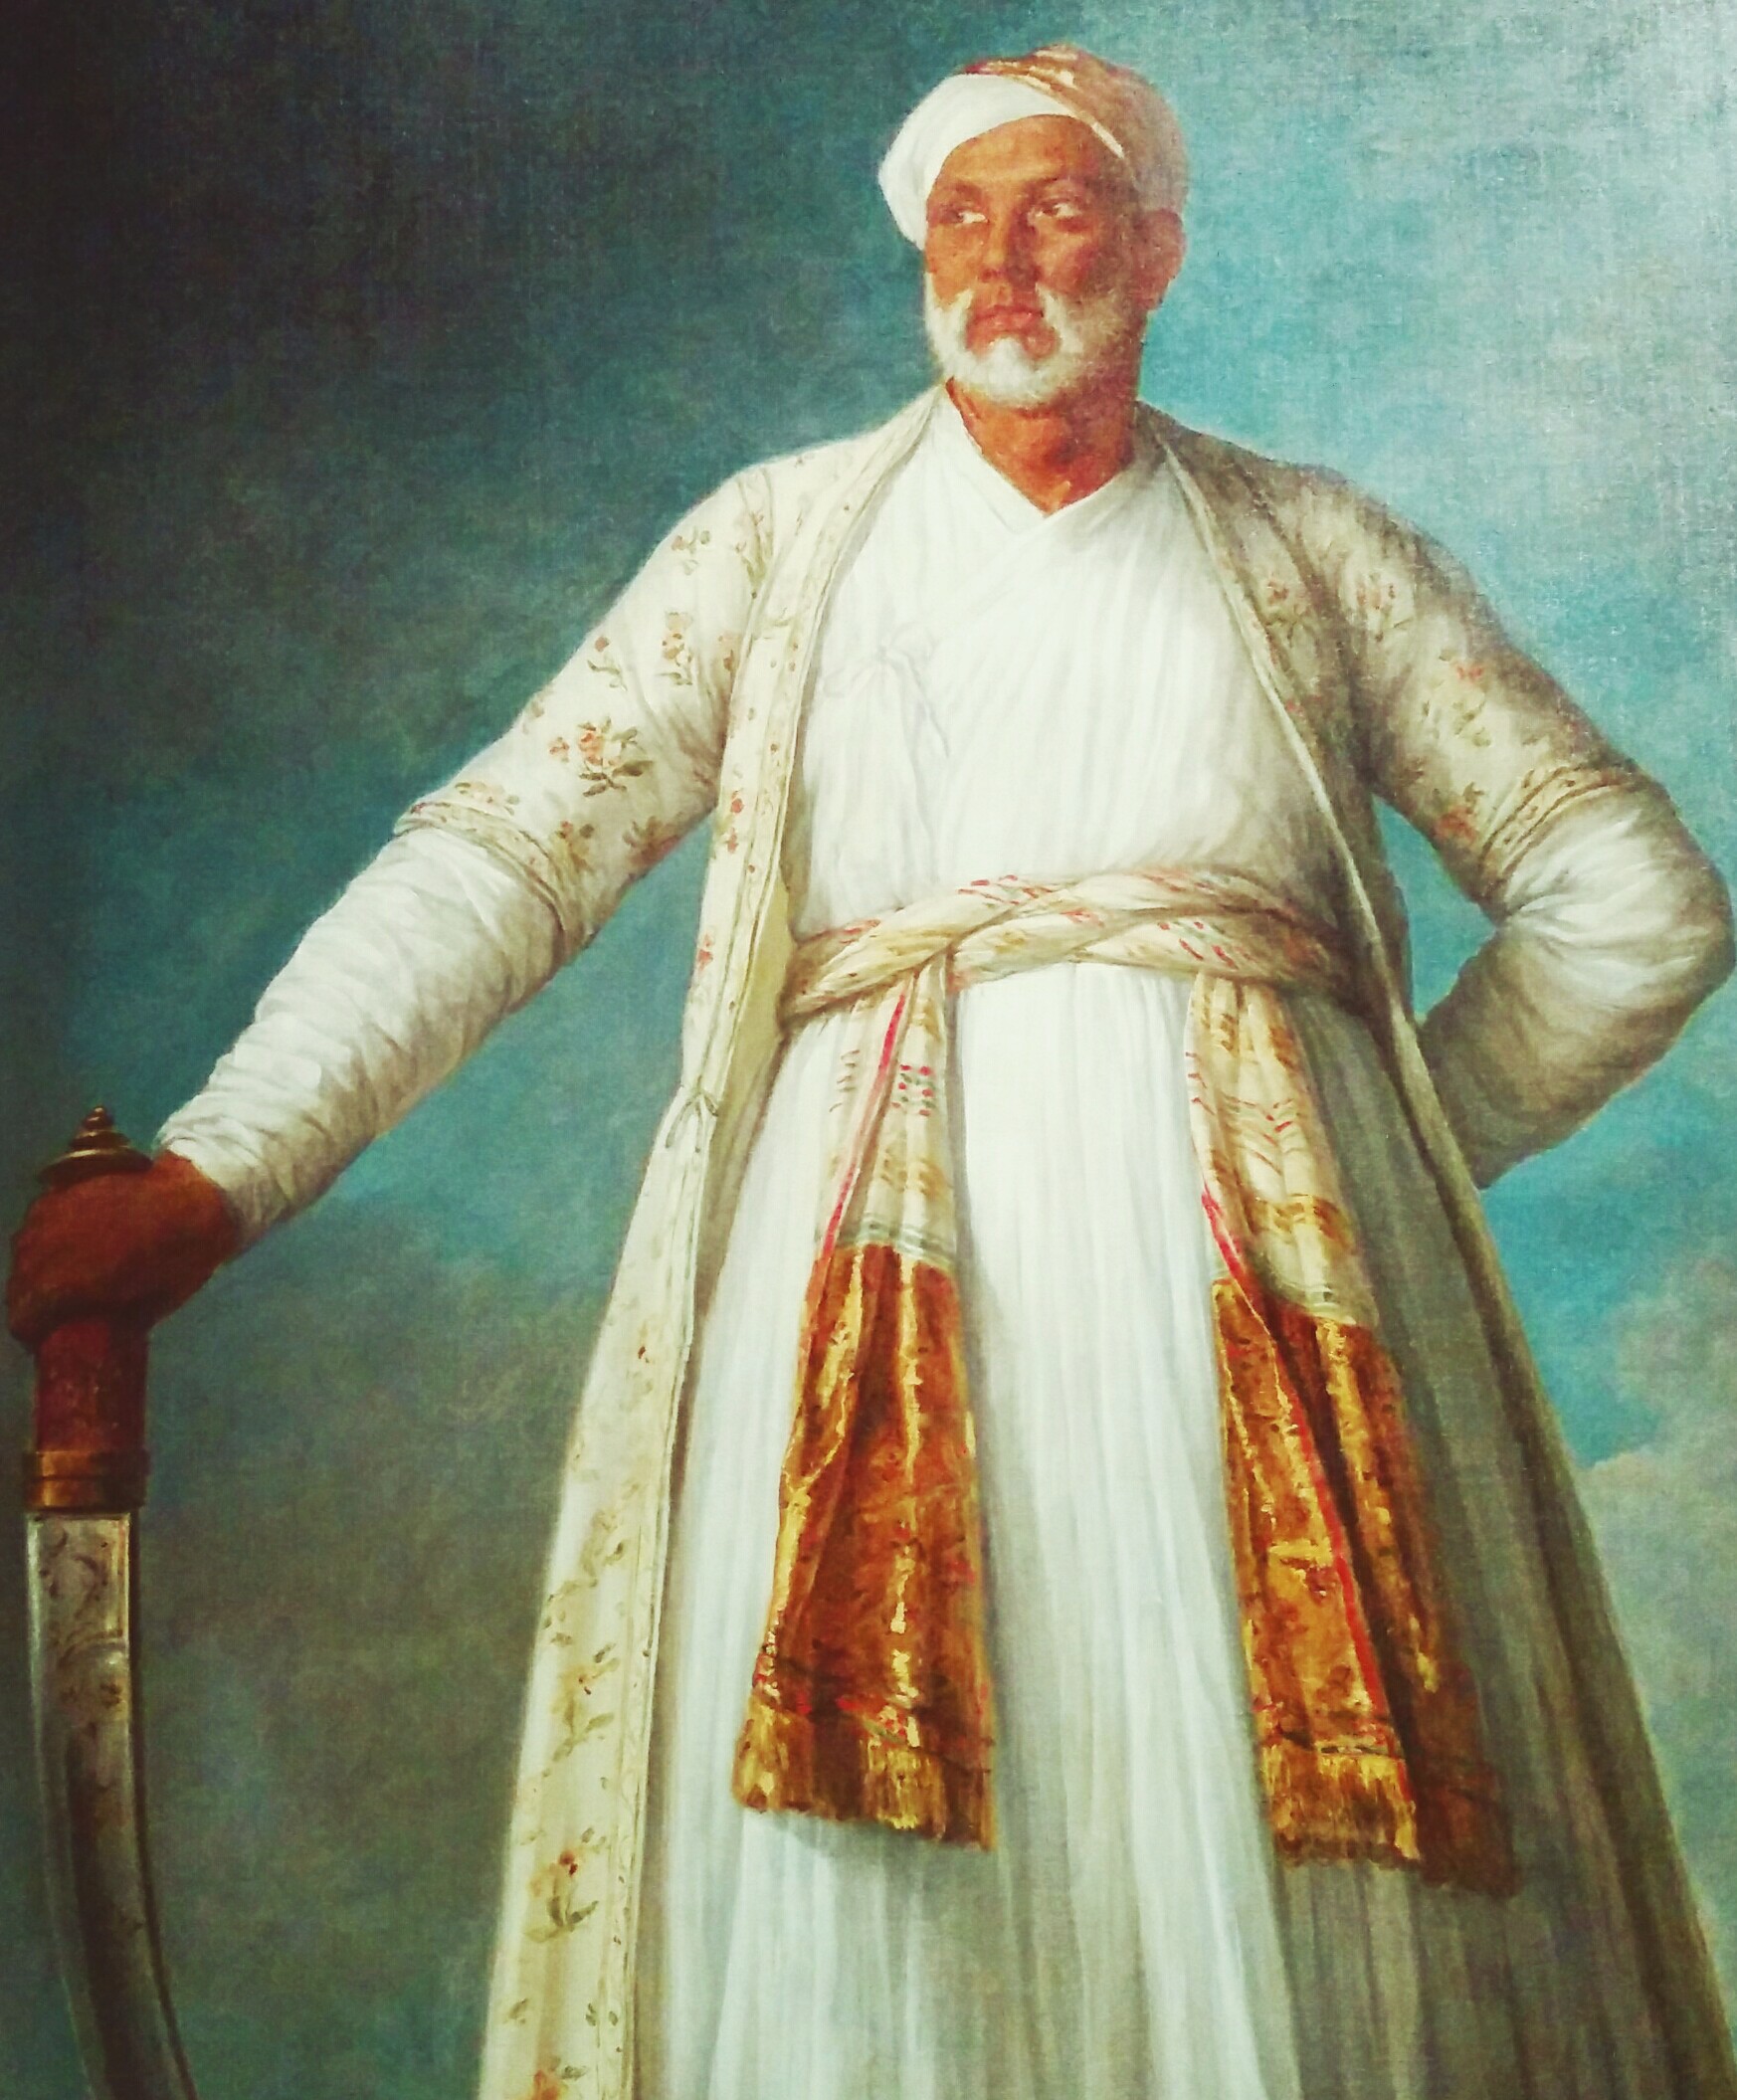 Painting of TIpu's ambassador to France, wearing white robes. 